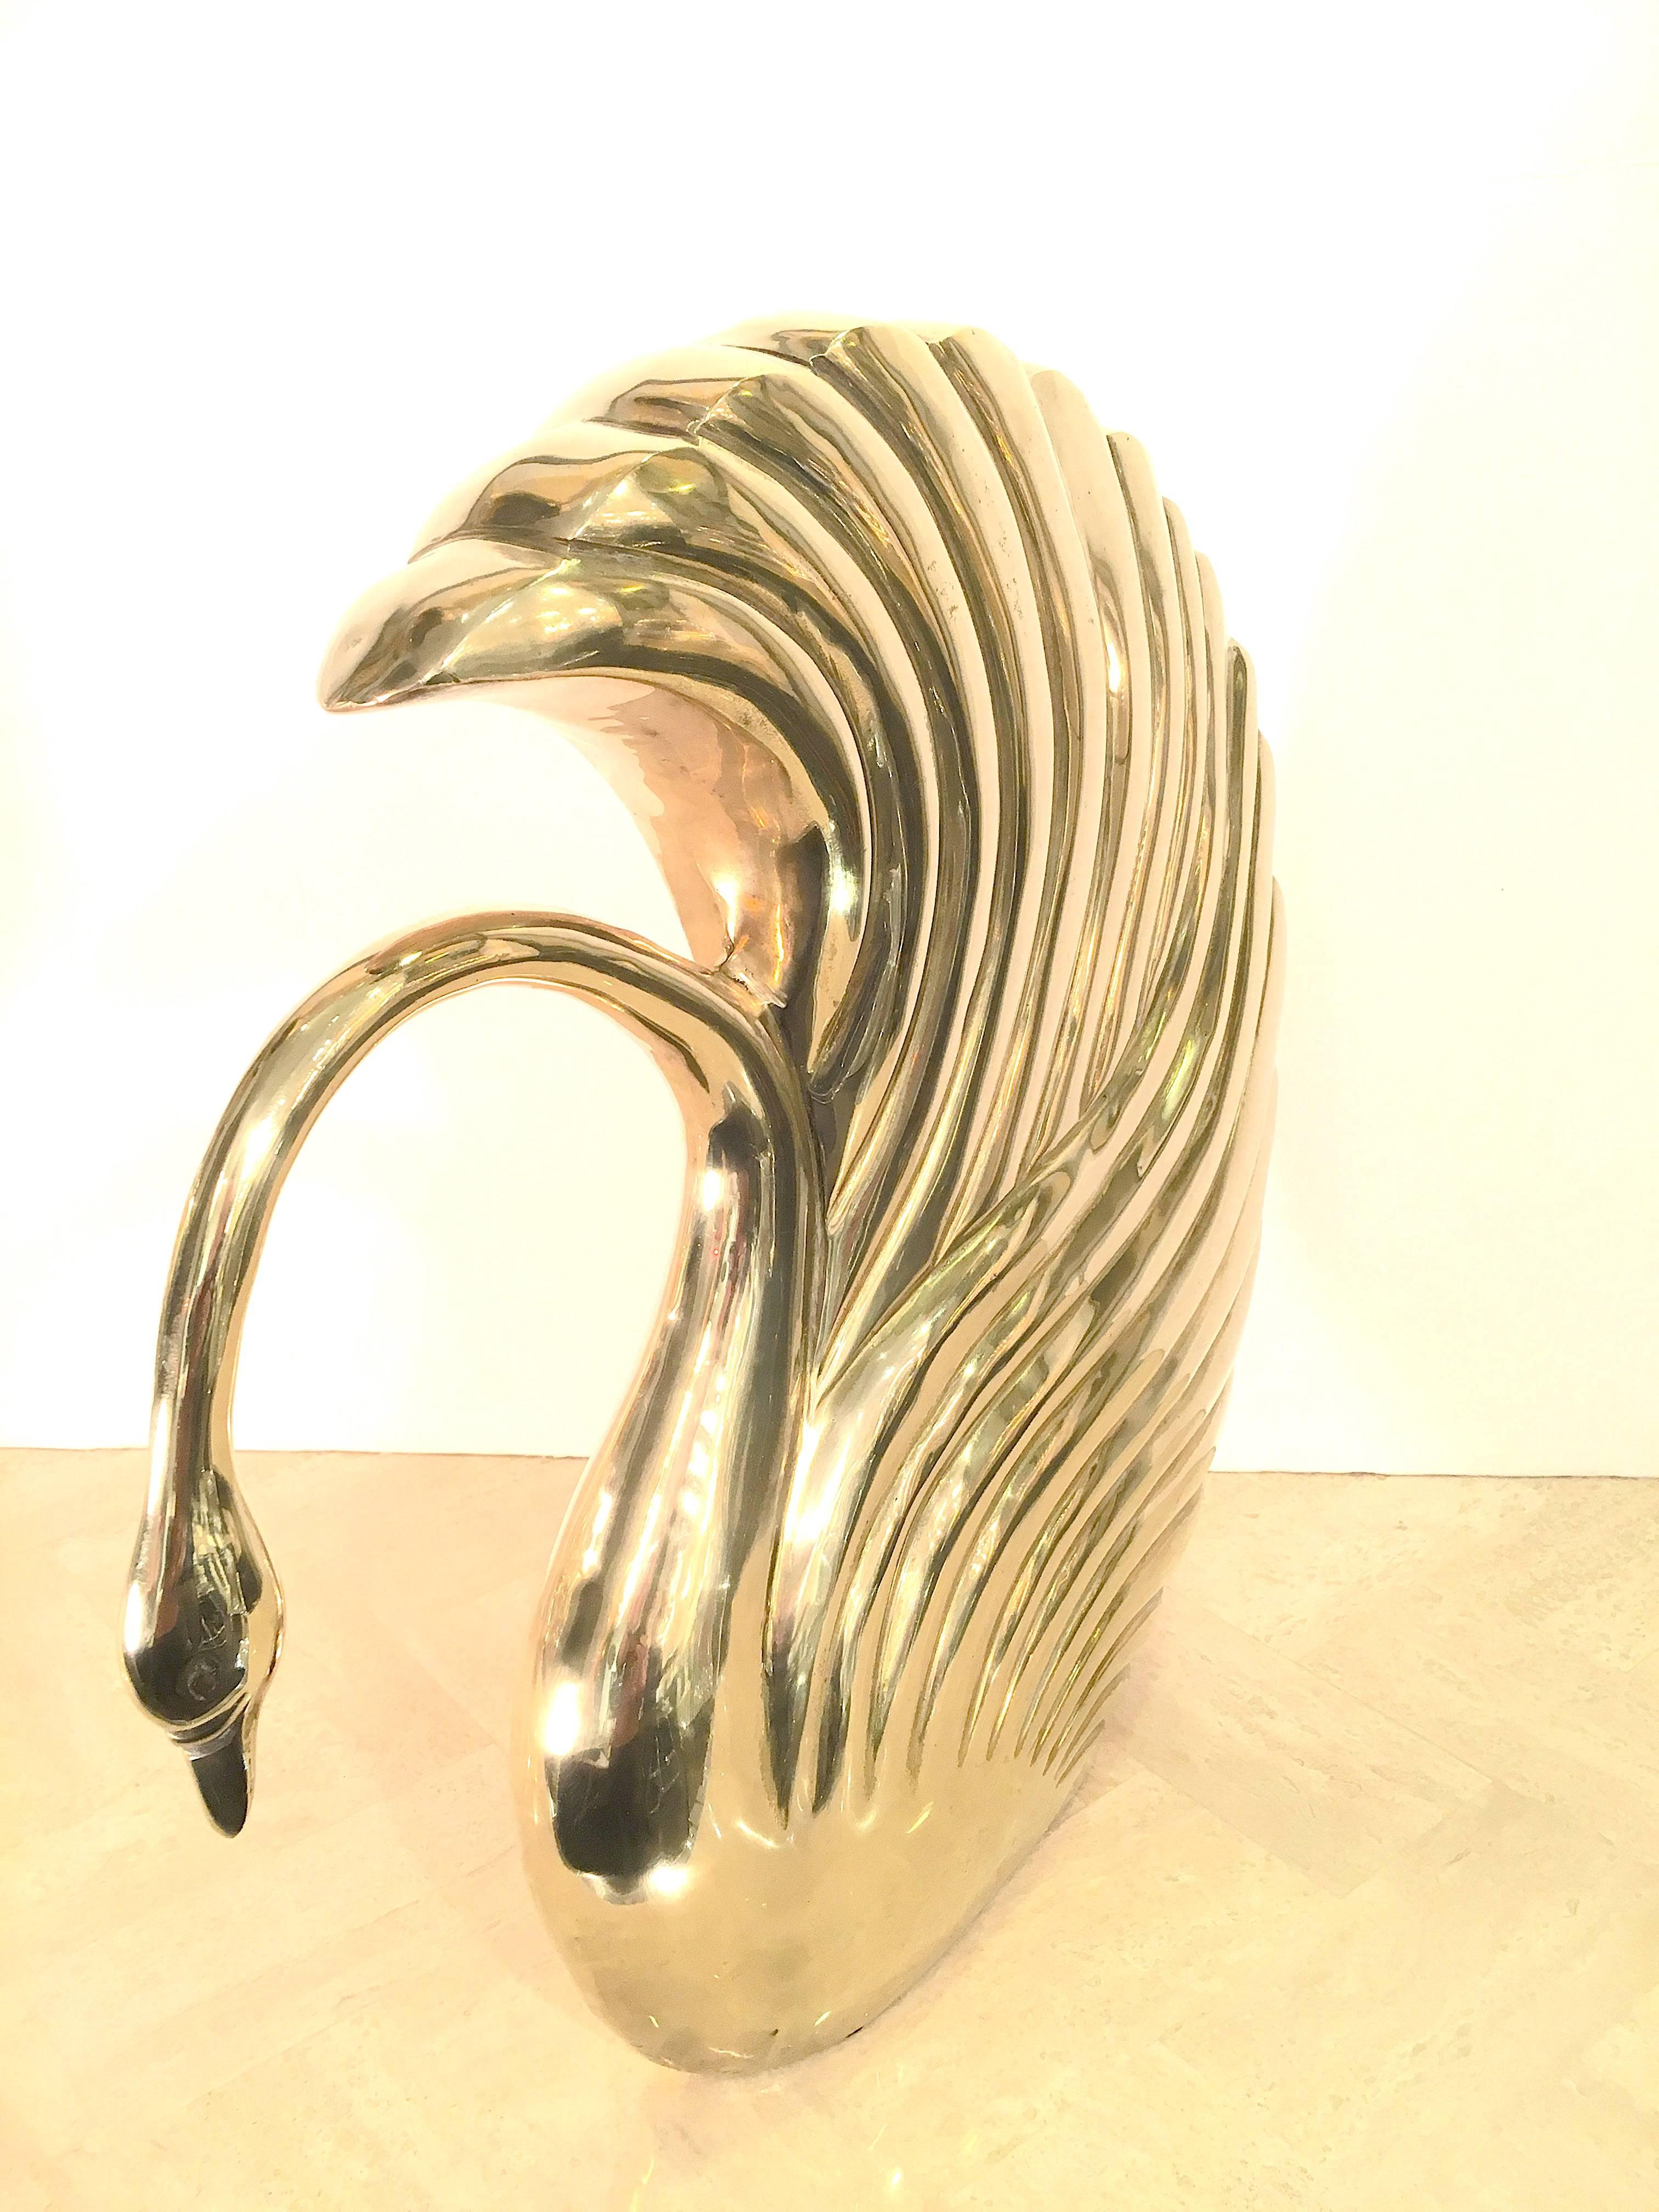 Polished Pair of Grand Scale Art Deco Revival Brass Swans by Dolbi Cashier For Sale